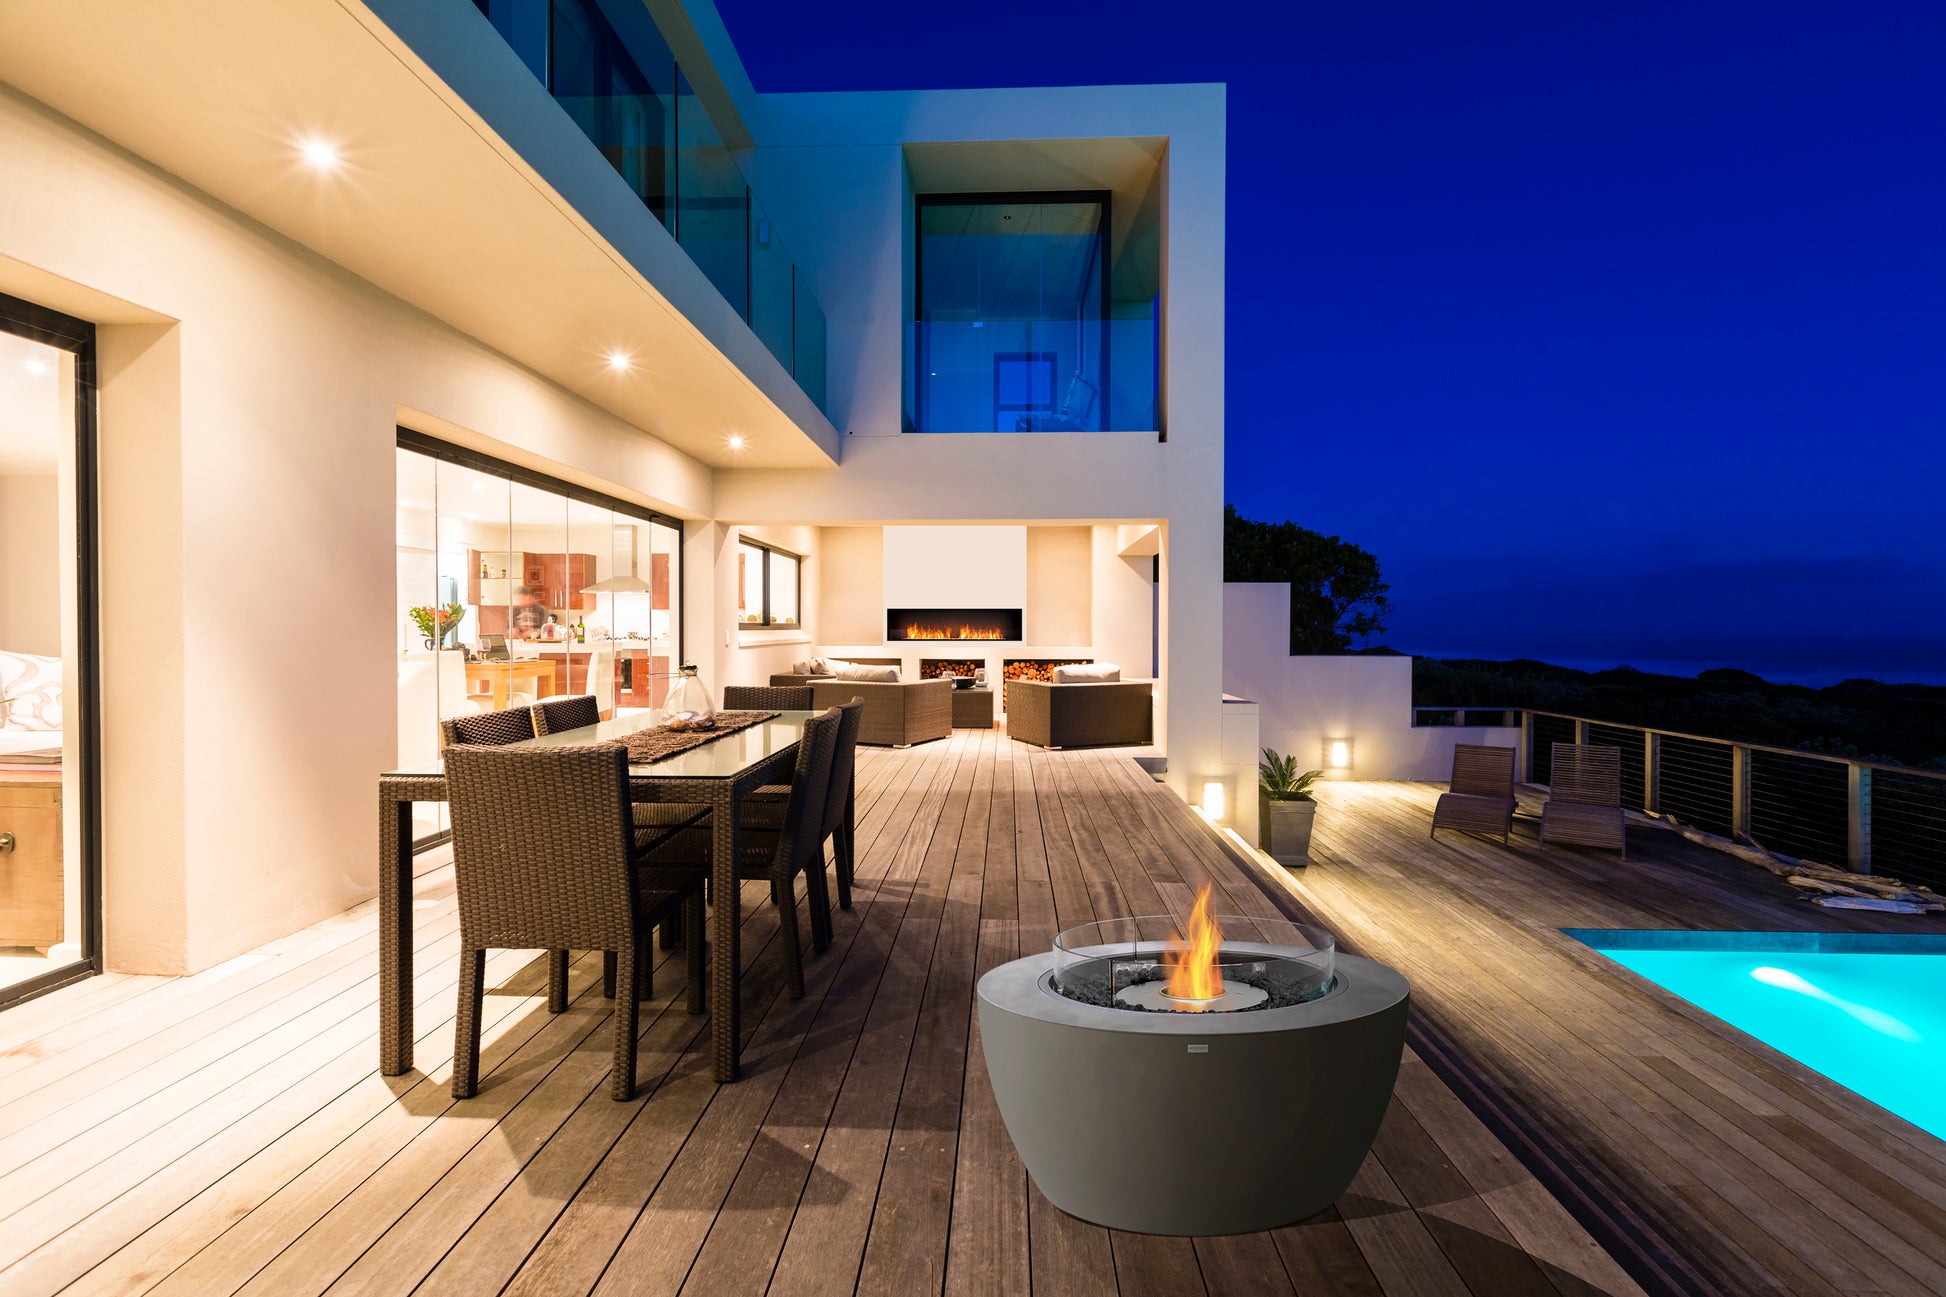 EcoSmart Fire Pod 40 Fire Pit Bowl with Bioethanol Sustainable Fuel - PadioLiving - EcoSmart Fire Pod 40 Fire Pit Bowl with Bioethanol Sustainable Fuel - Fire Pit - PadioLiving